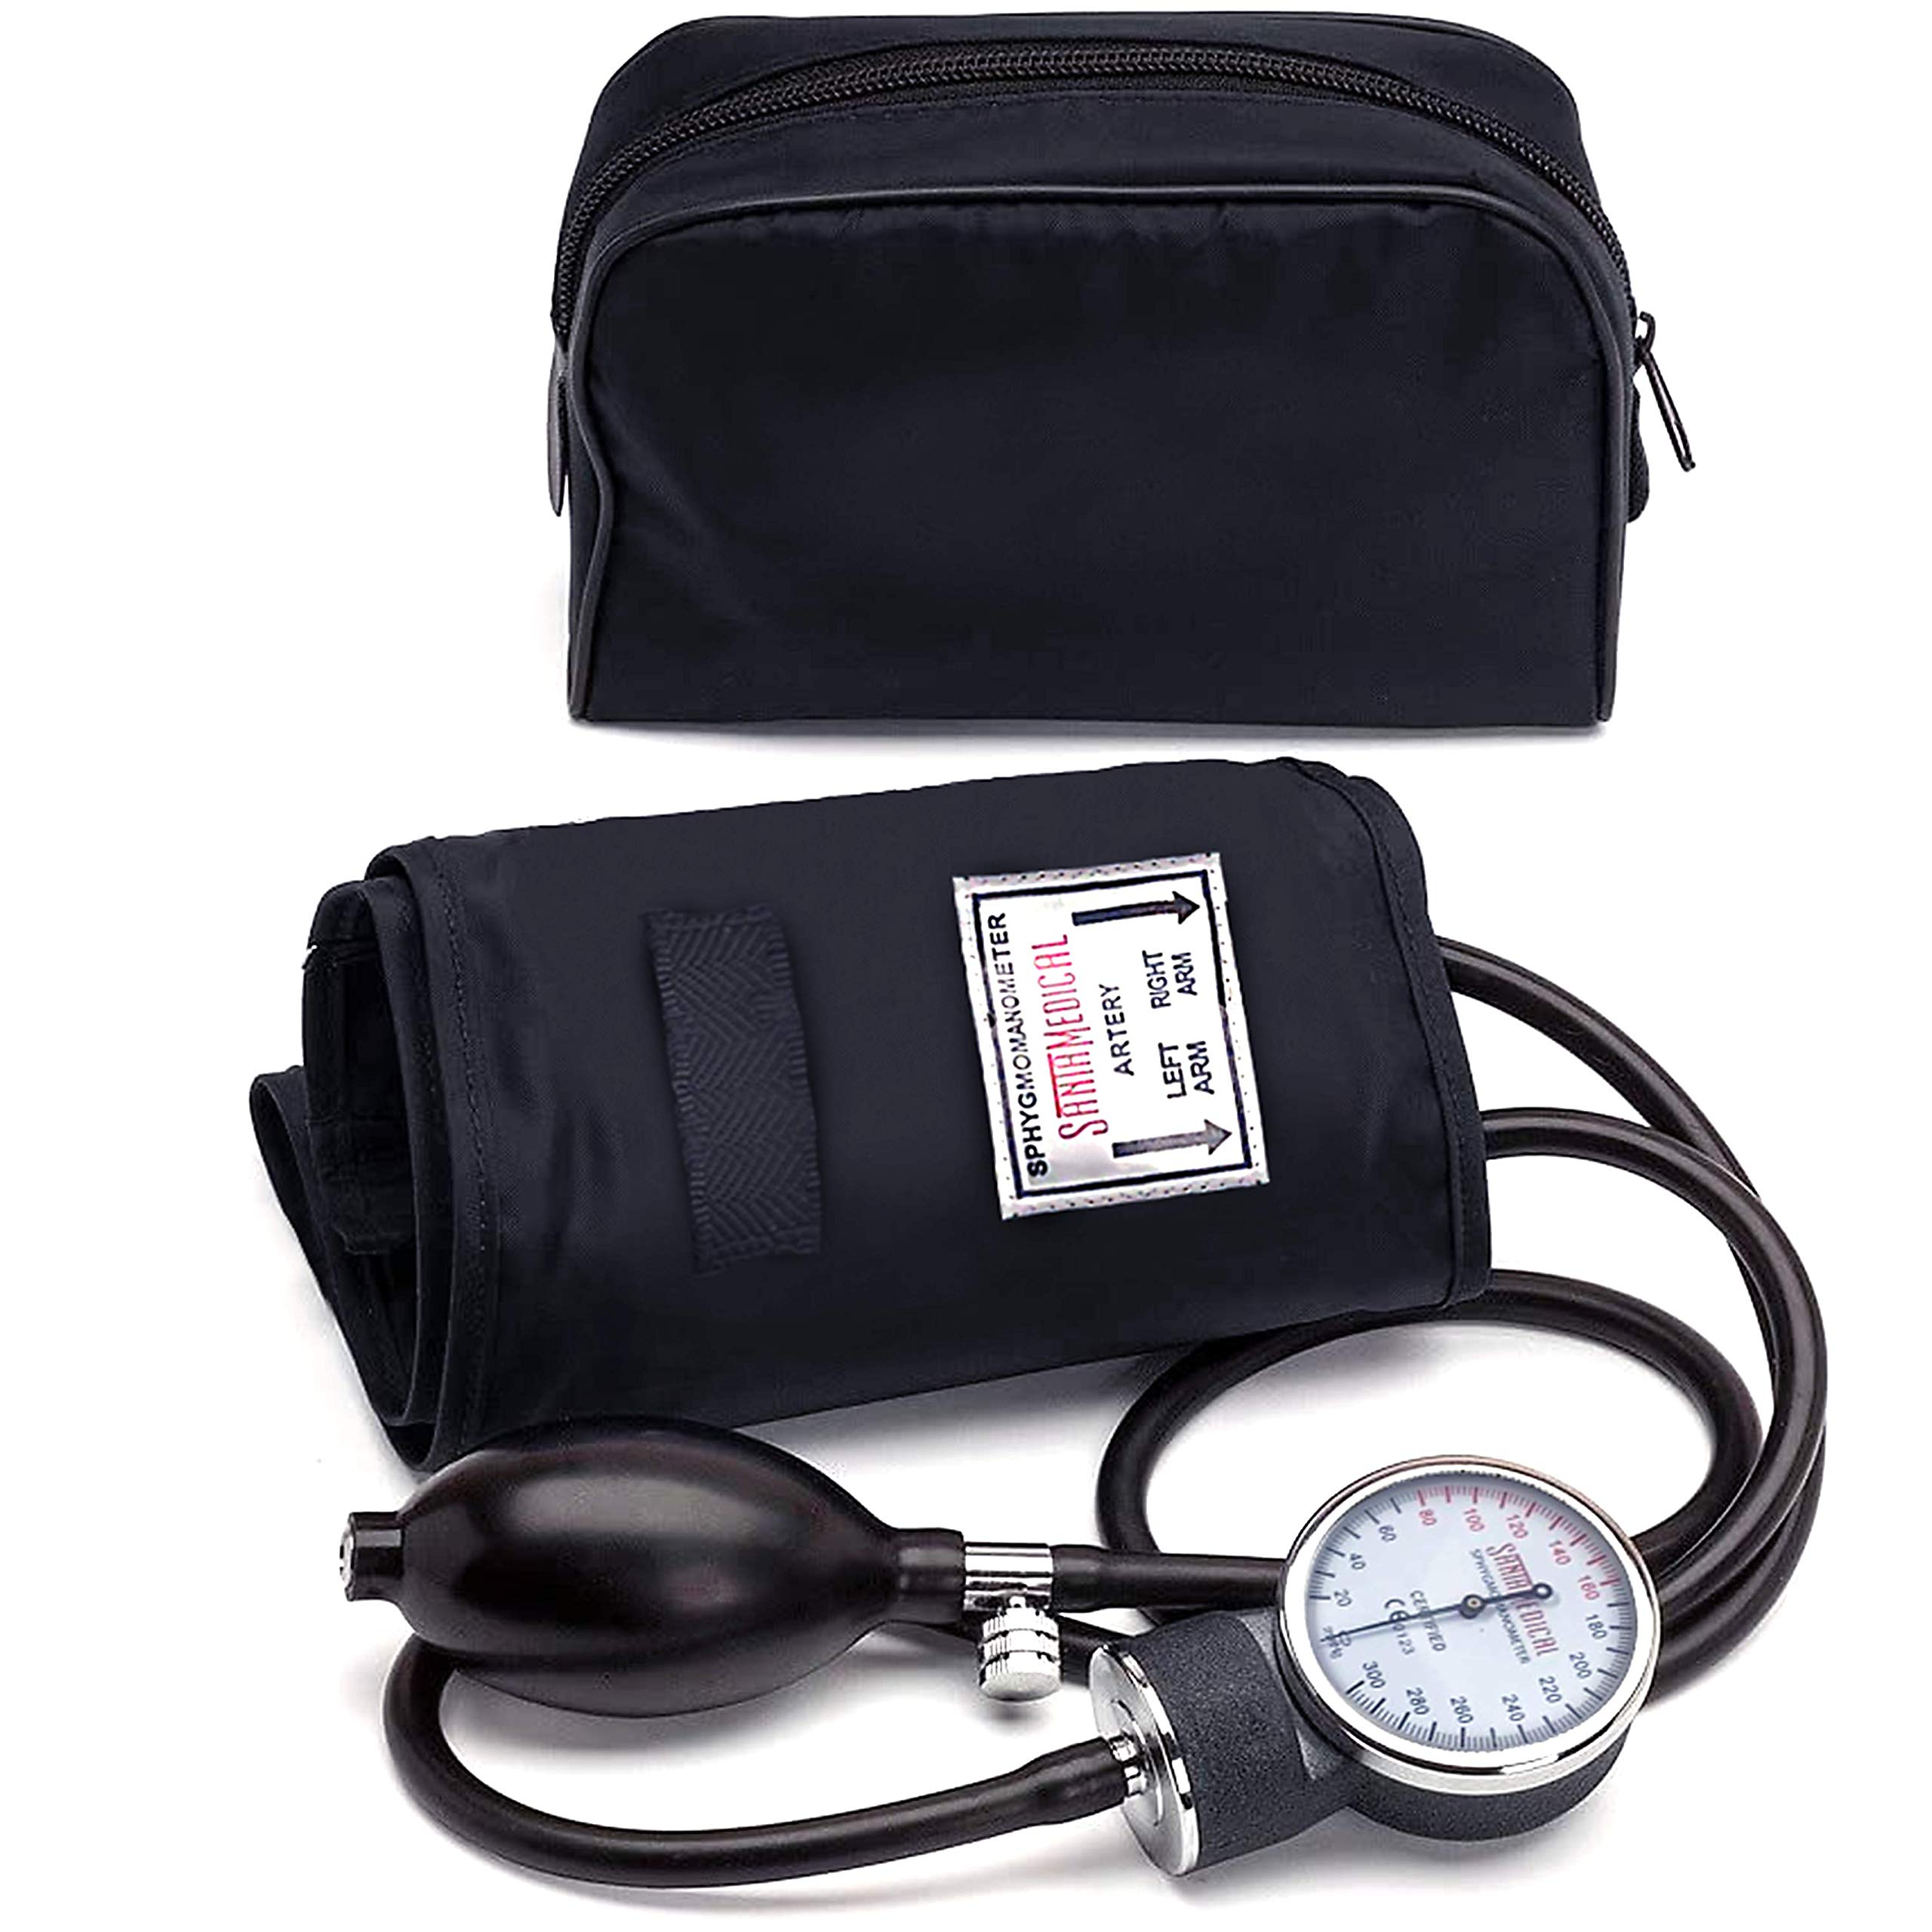 Digital Blood Pressure Monitor LD30 - Little Doctor :: Digital Blood  Pressure Monitors, Sphygmomanometers, Stethoscopes, Nebulizers, Thermometers